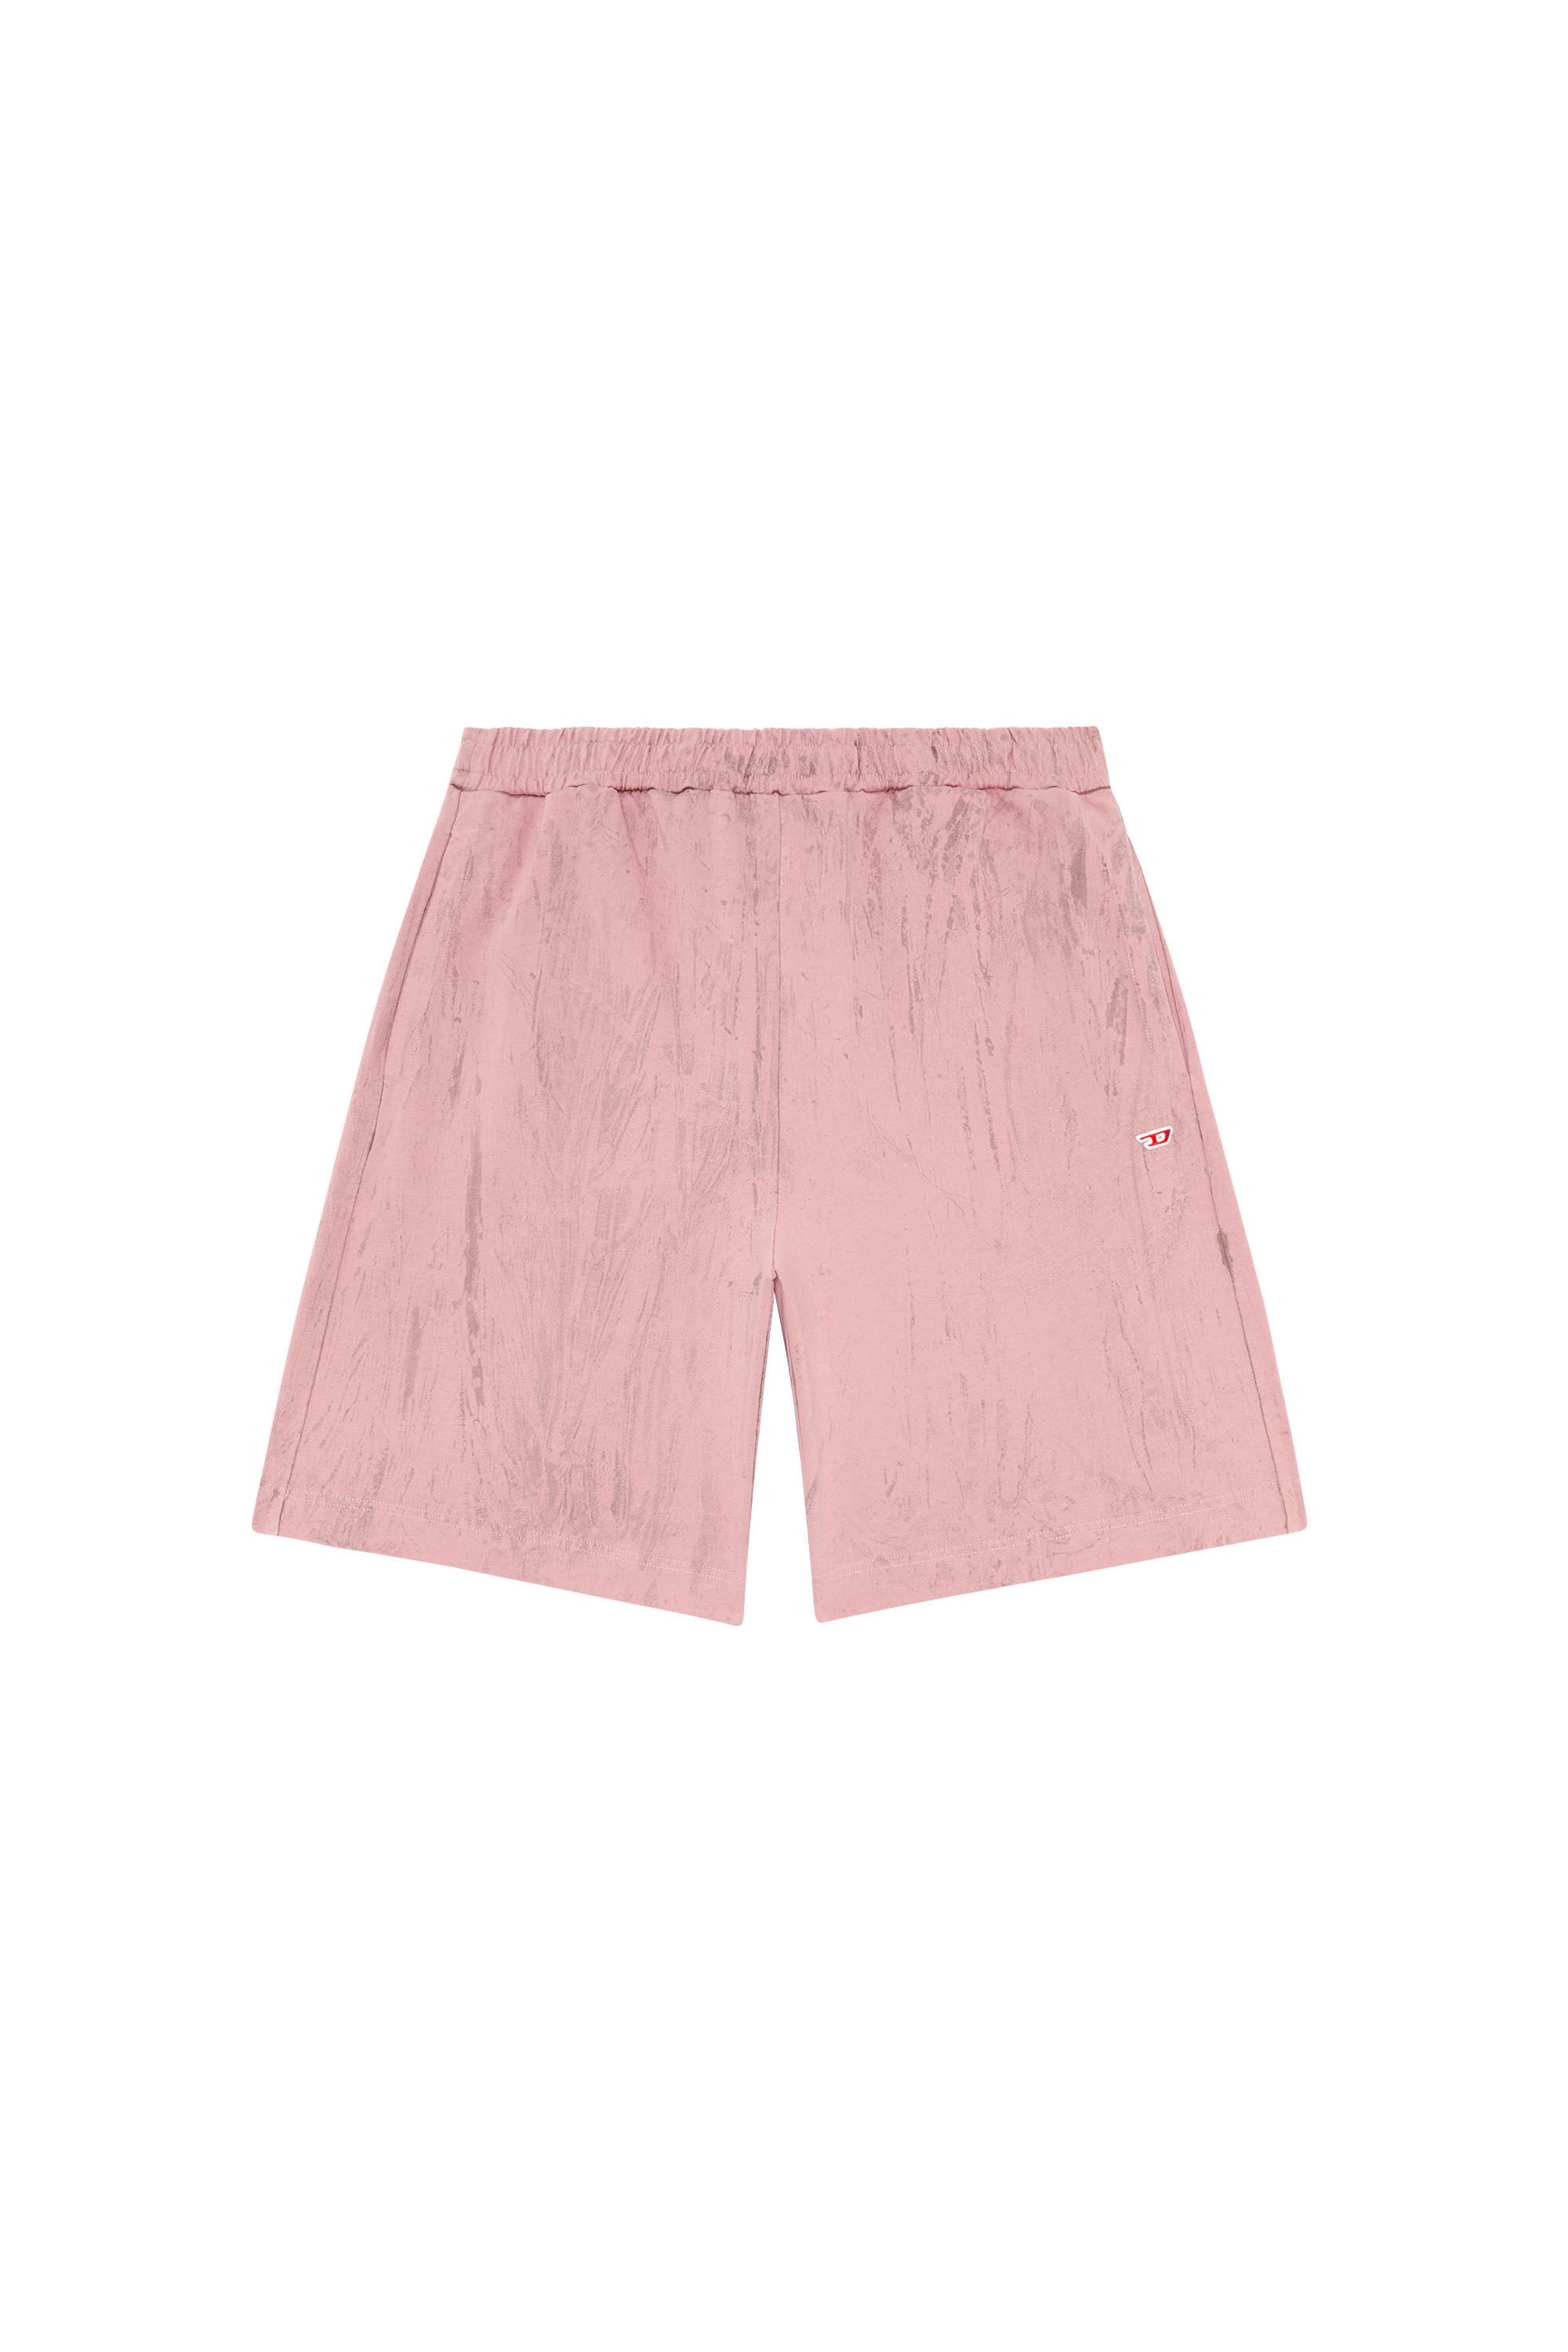 Diesel - P-CROWN-N1, Man Jersey shorts with cracked effect in Pink - Image 2